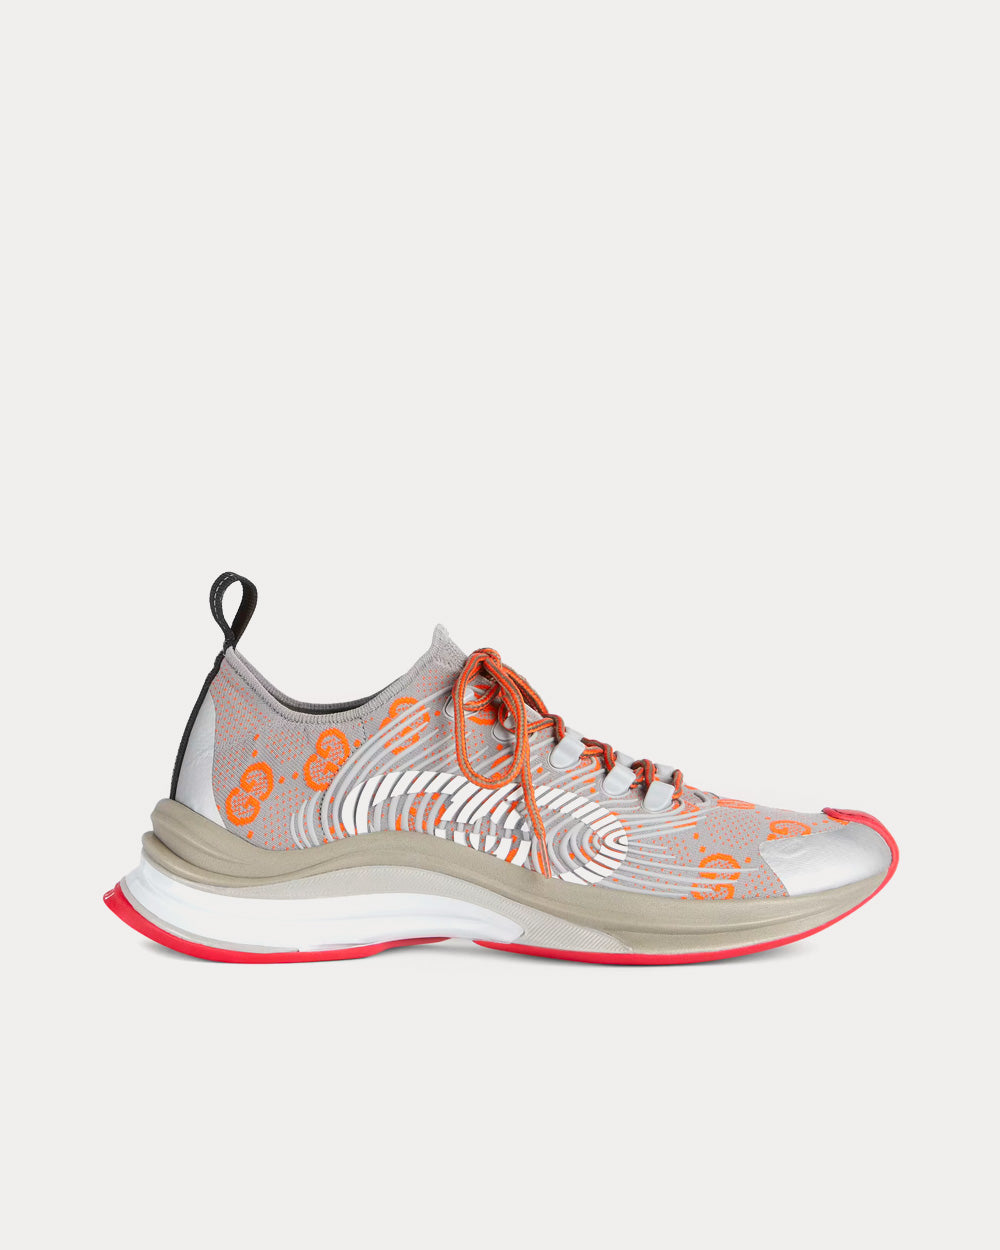 Grey, orange and white run sneakers in rubber calfskin, technical